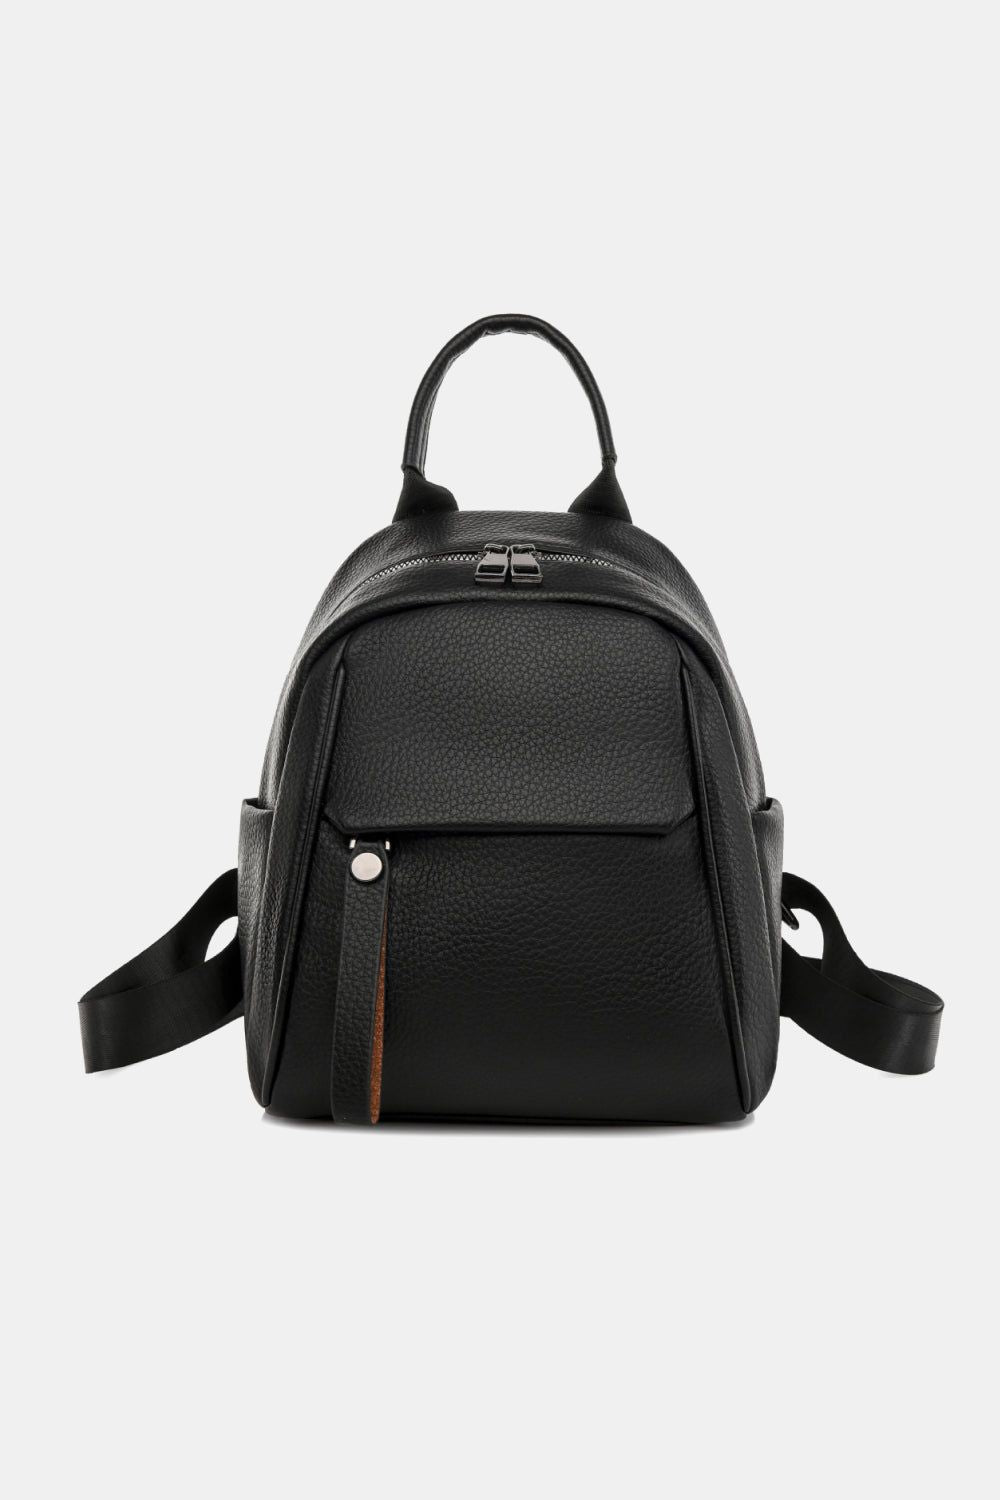 Small PU Leather Backpack.